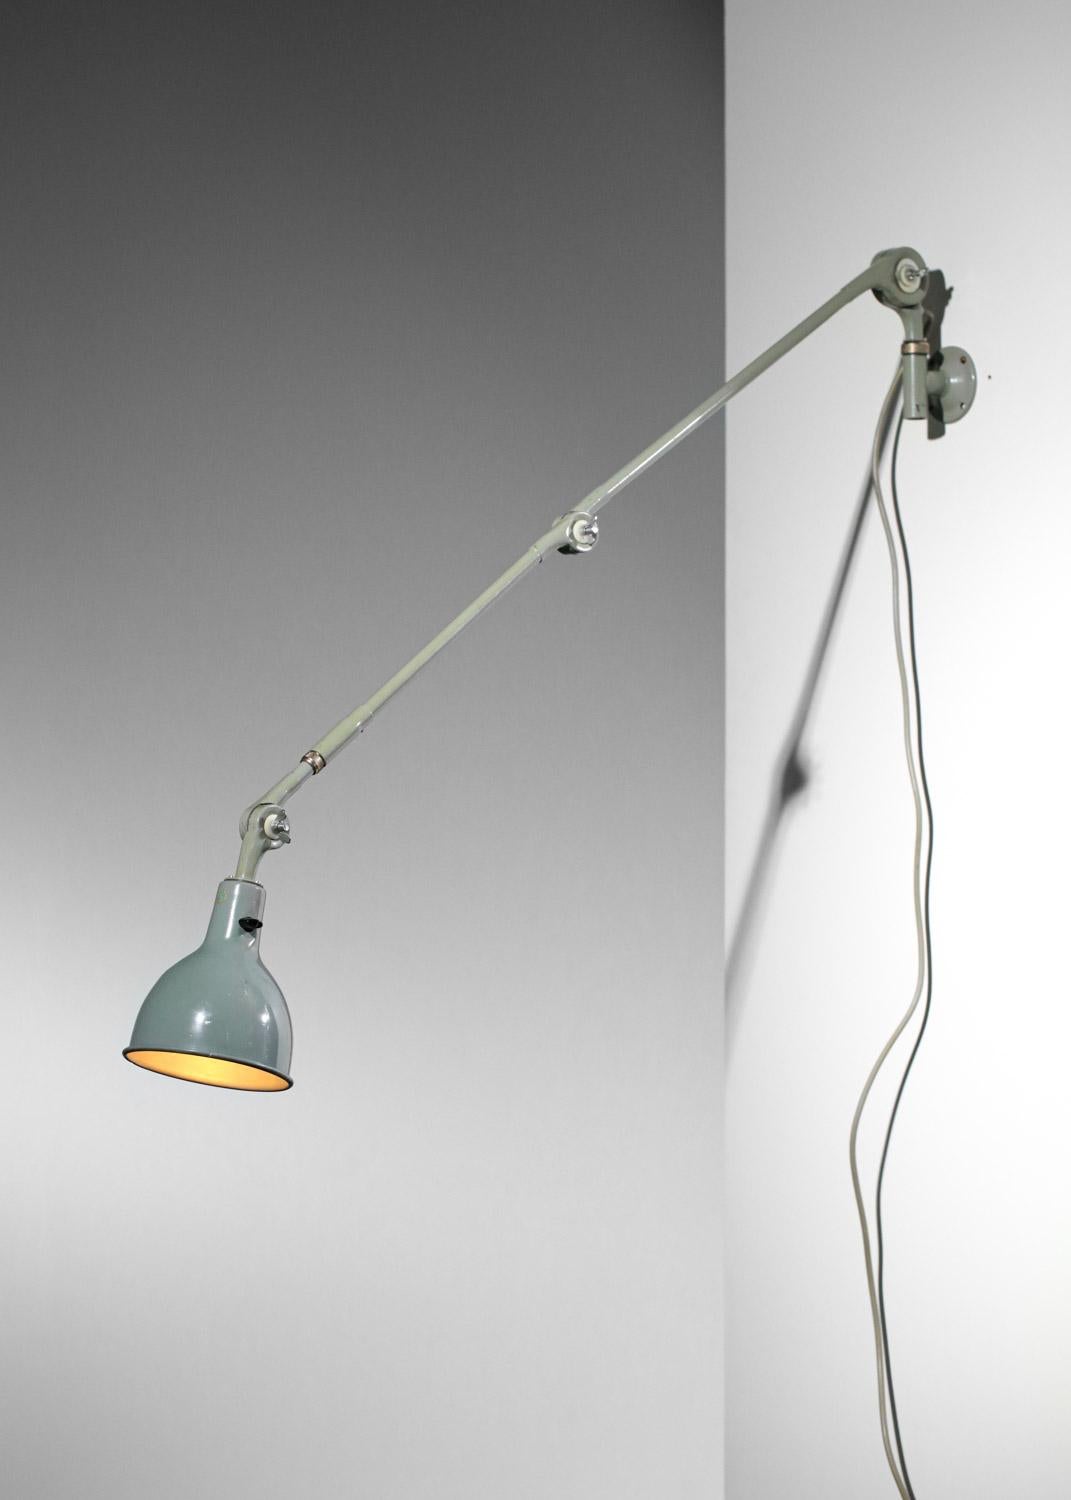 Large 60's Swedish industrial-style wall lamp. Structure and shade in grey/blue lacquered metal (original paint). Articulated arm allows the sconce to be oriented in different positions. Nice vintage condition, slight traces of age and use (see